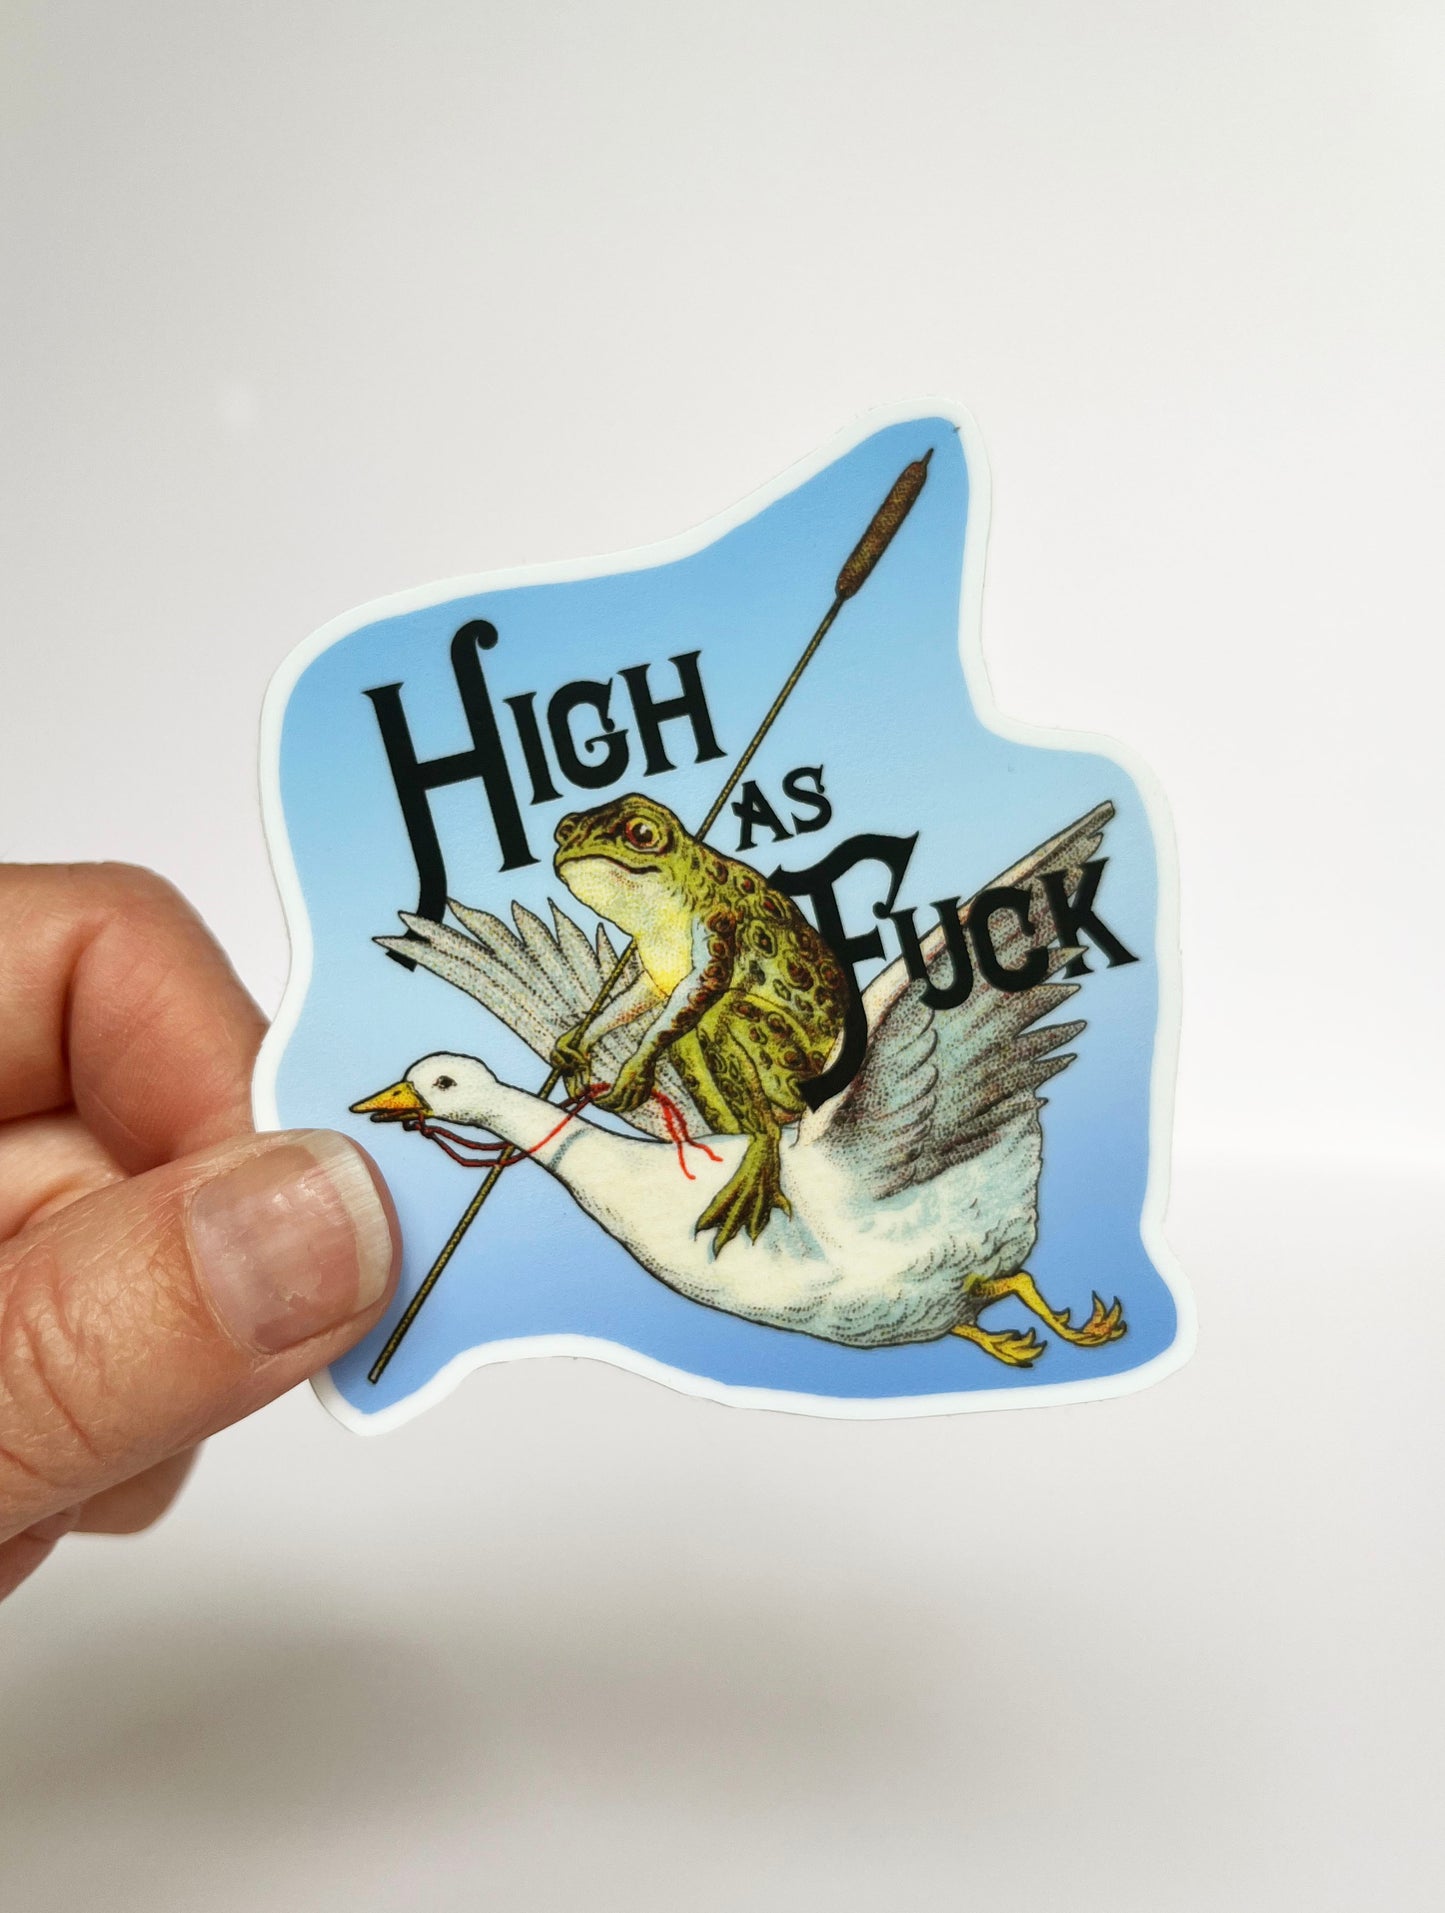 high as fuck sticker vintage style frog riding goose frog riding bird toad blue funny 420 sticker coin laundry montana 